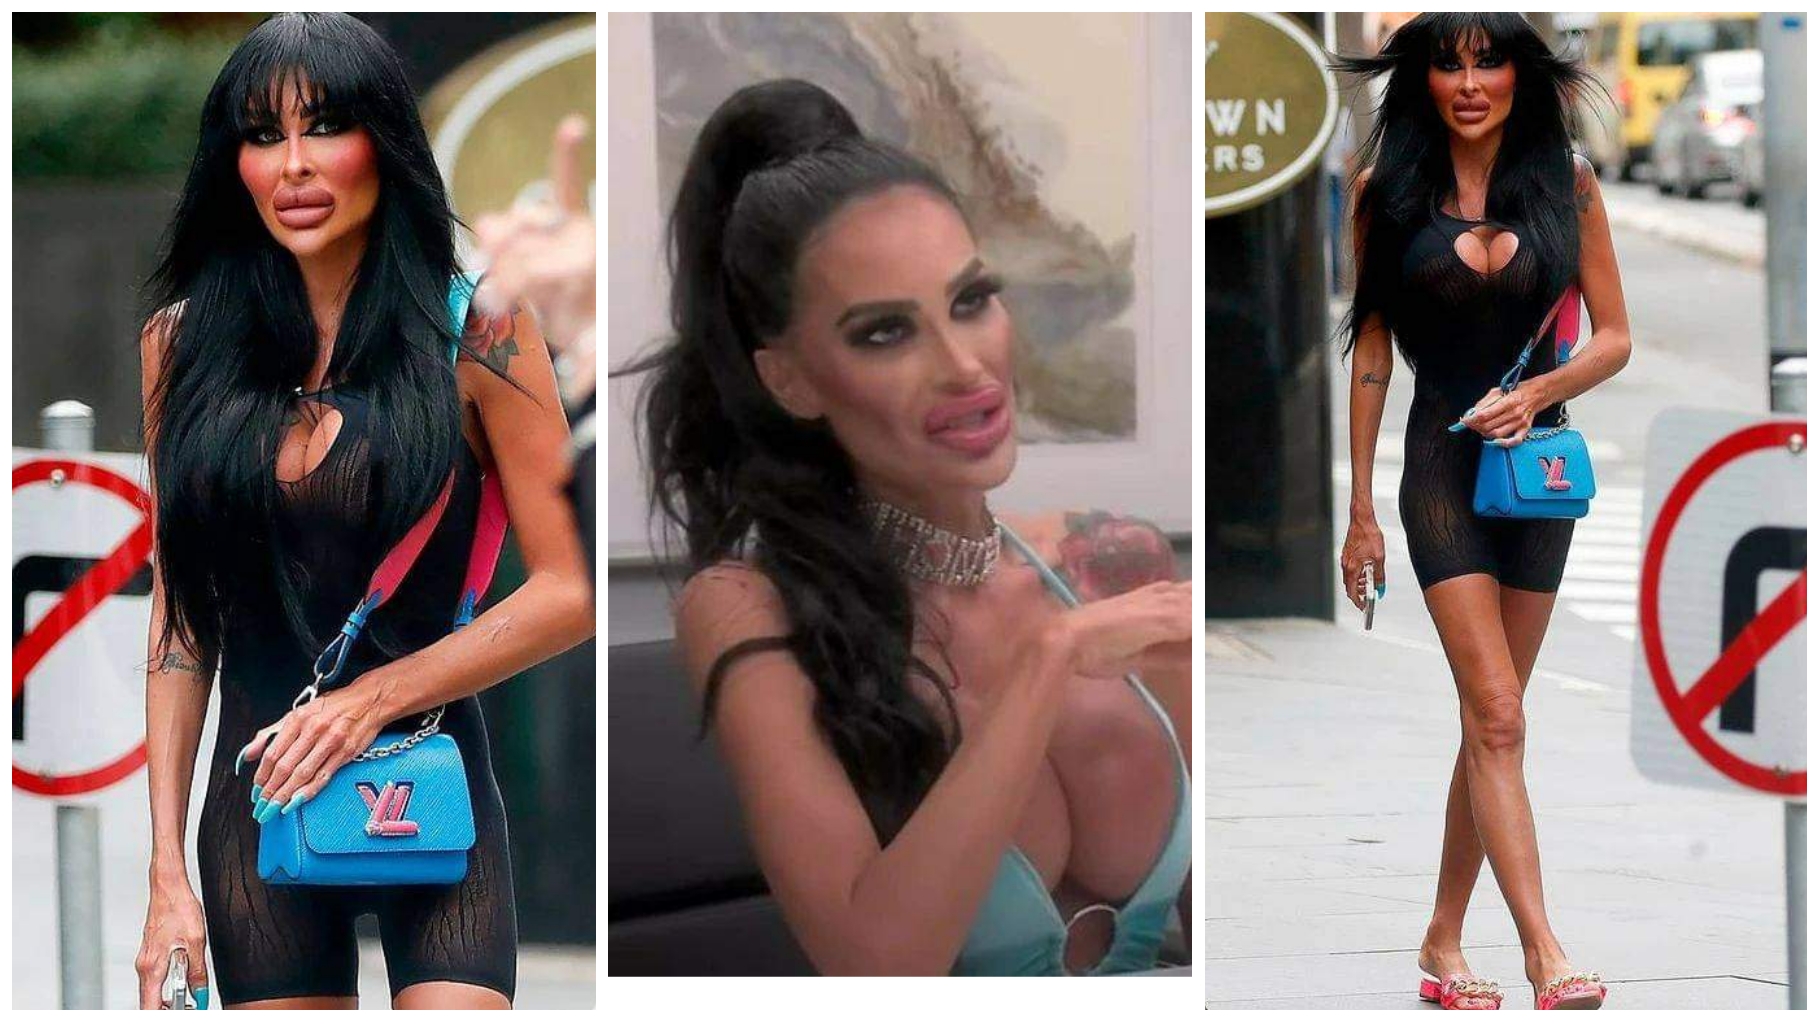 Plastic Surgery Queen' show off extreme look after